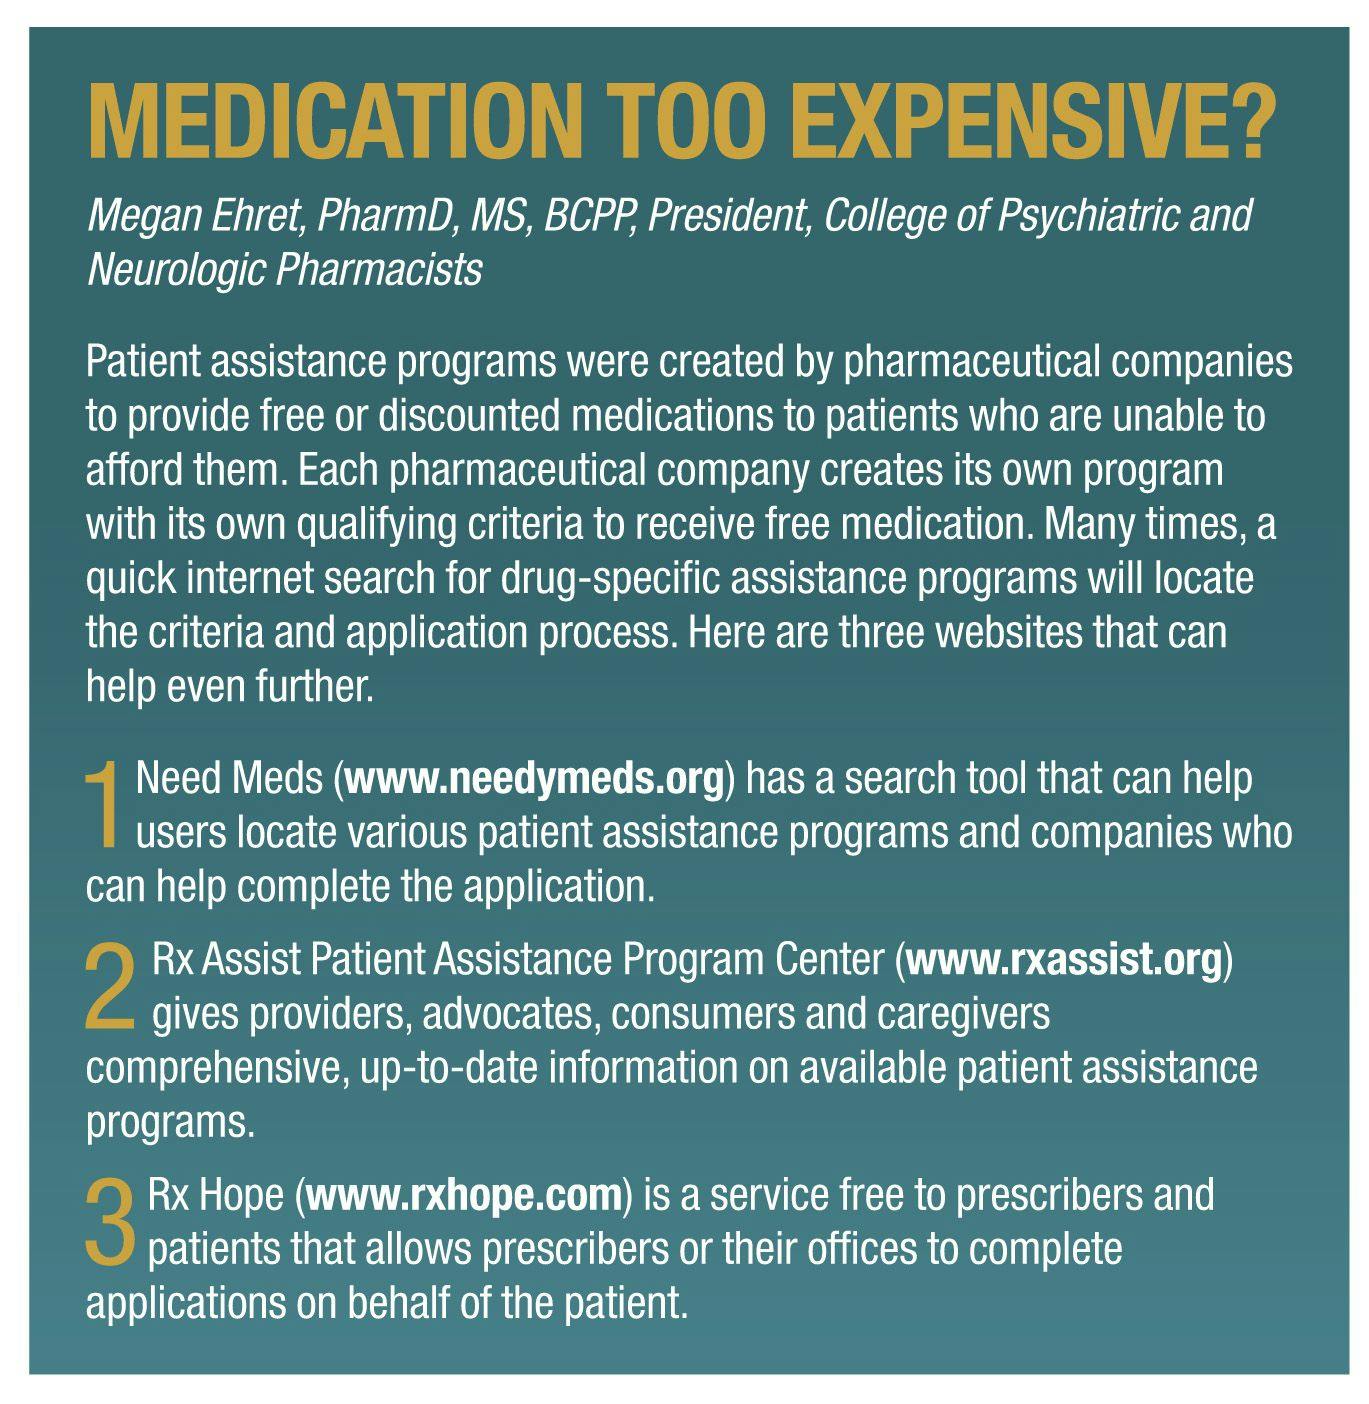 MEDICATION TOO EXPENSIVE?